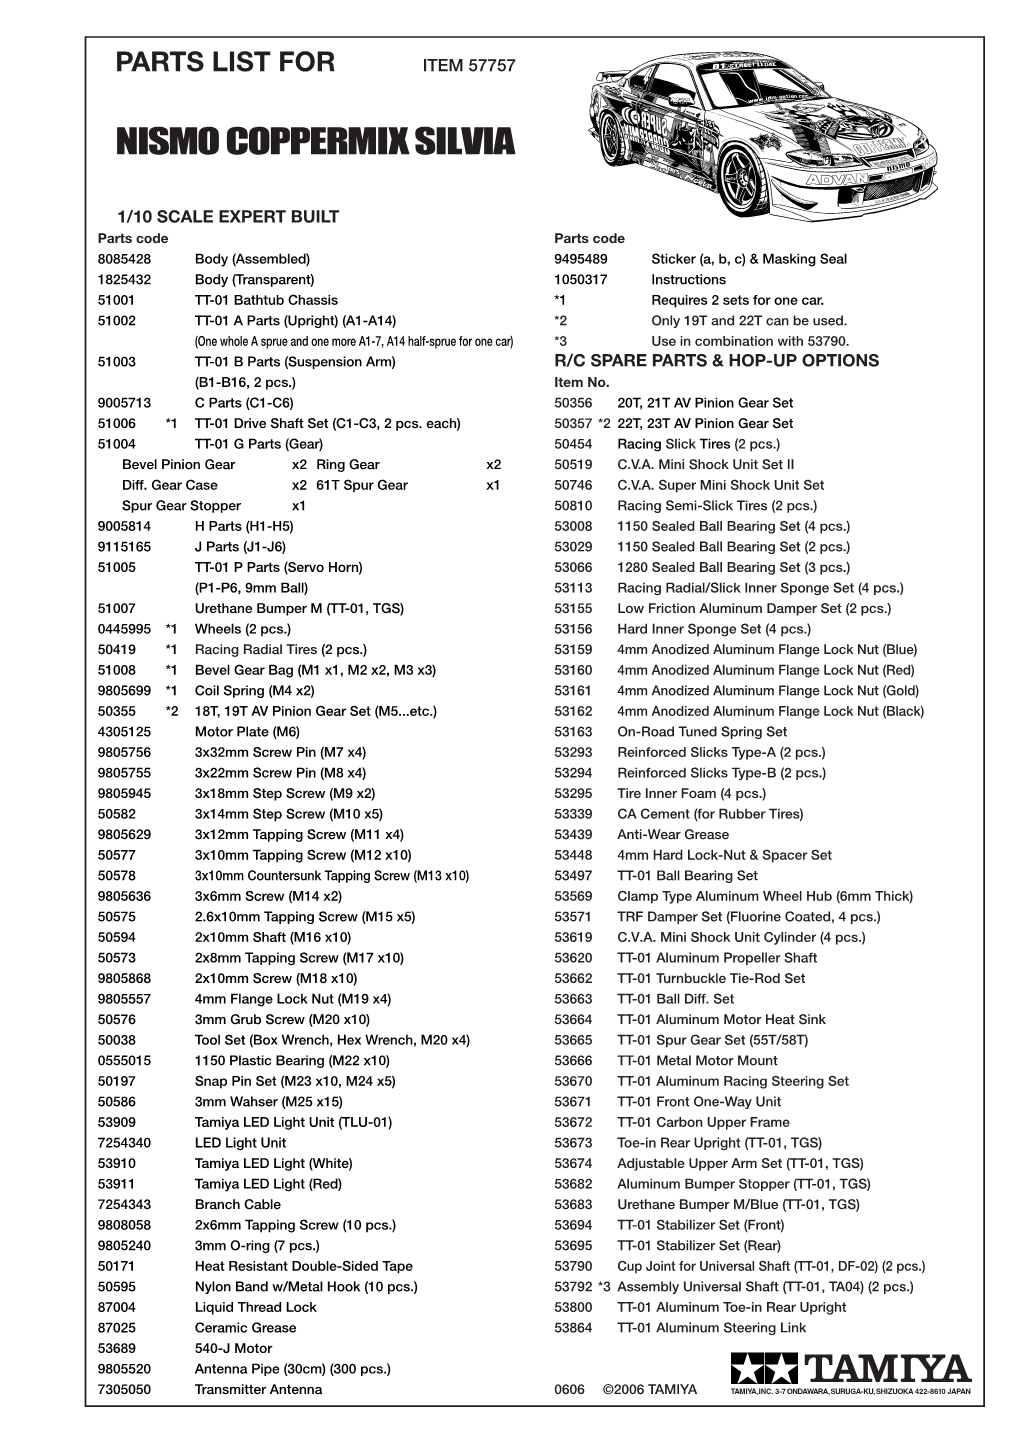 Parts List for Item 57757